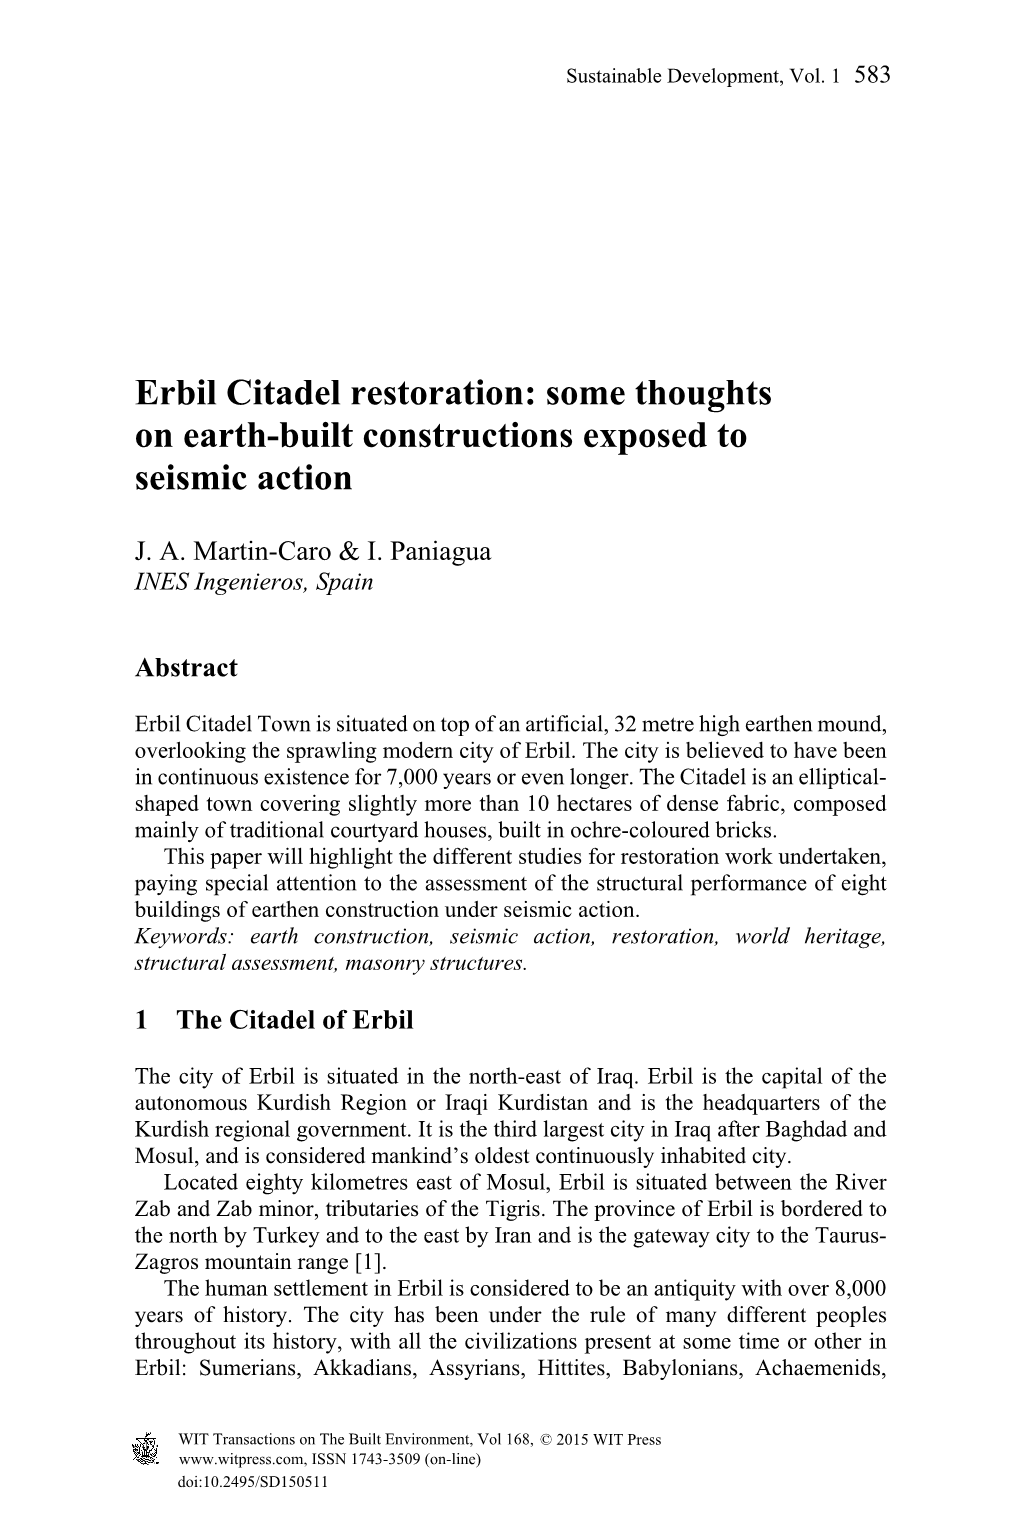 Erbil Citadel Restoration: Some Thoughts on Earth-Built Constructions Exposed to Seismic Action